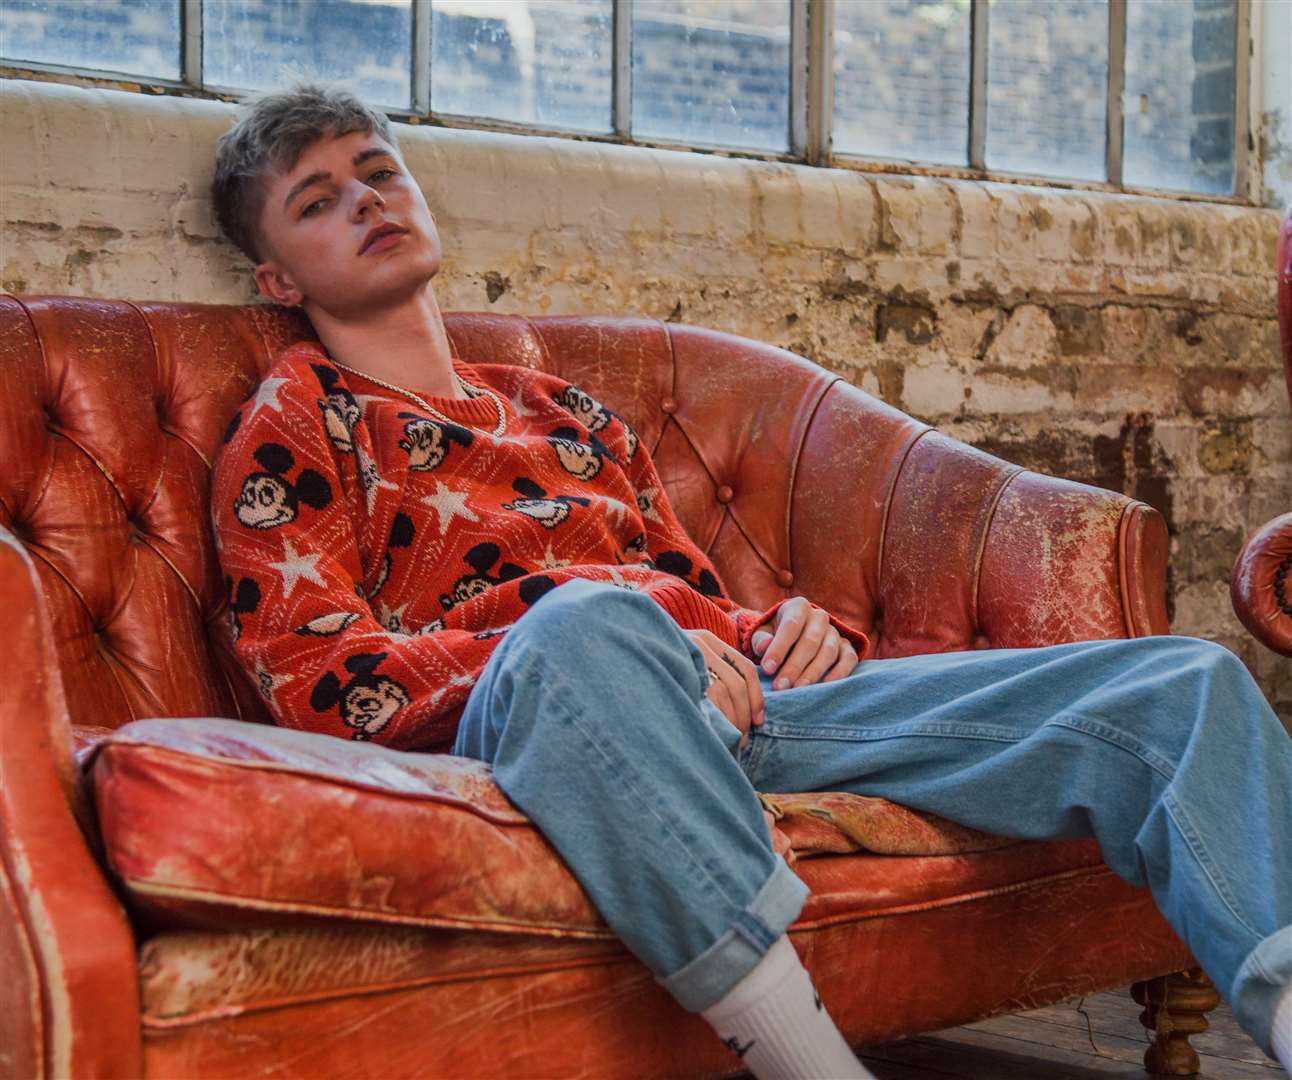 HRVY will be a special guest at Olly Murs' gig at the Hop Farm